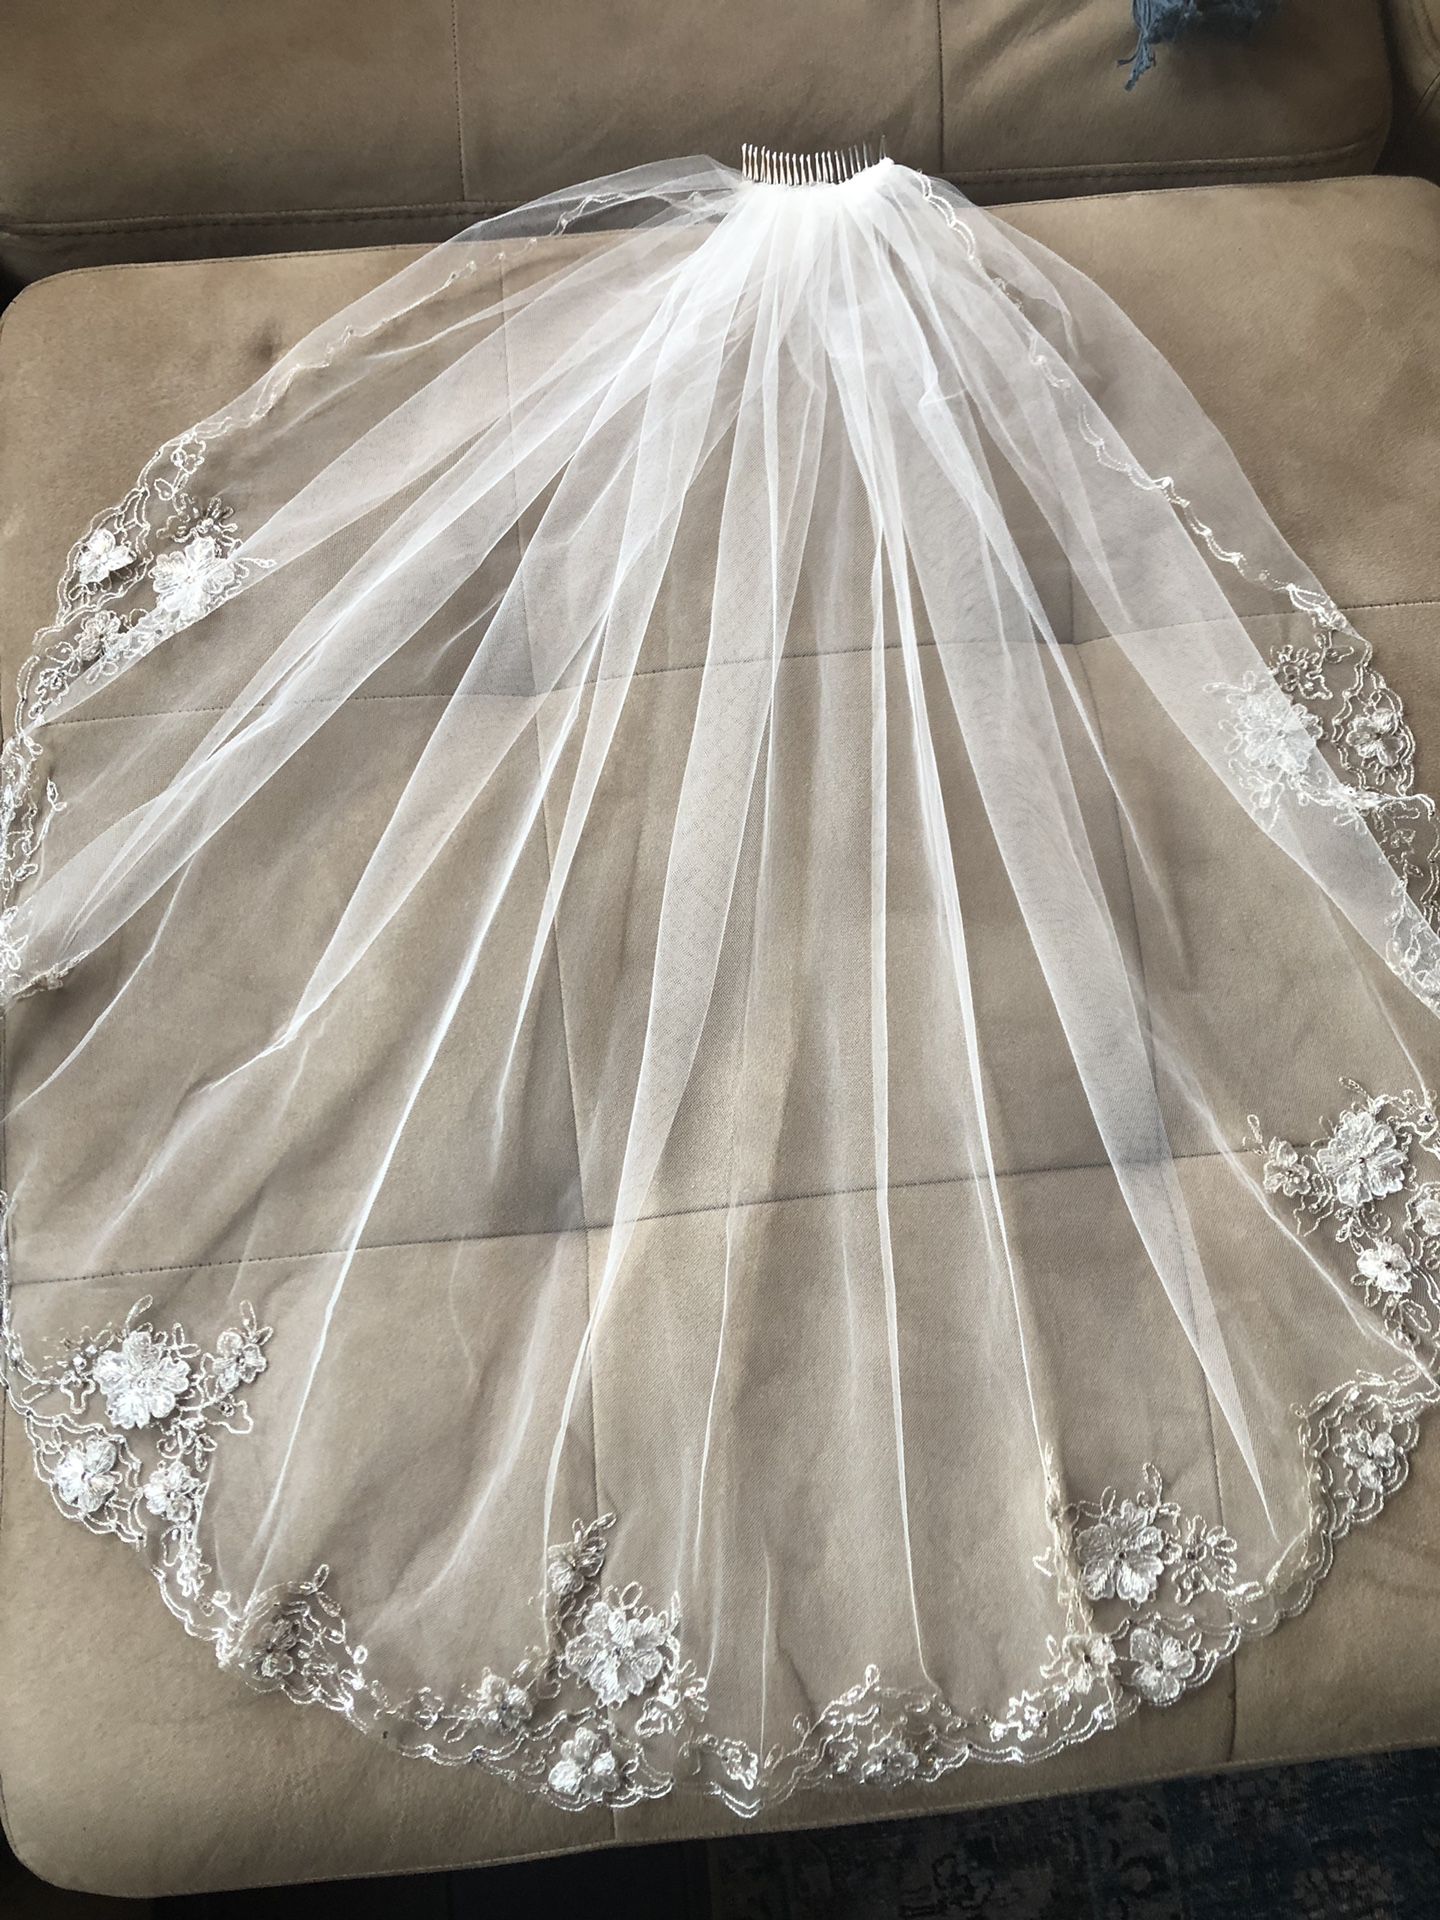 Ivory 32” wedding veil with silver metal comb